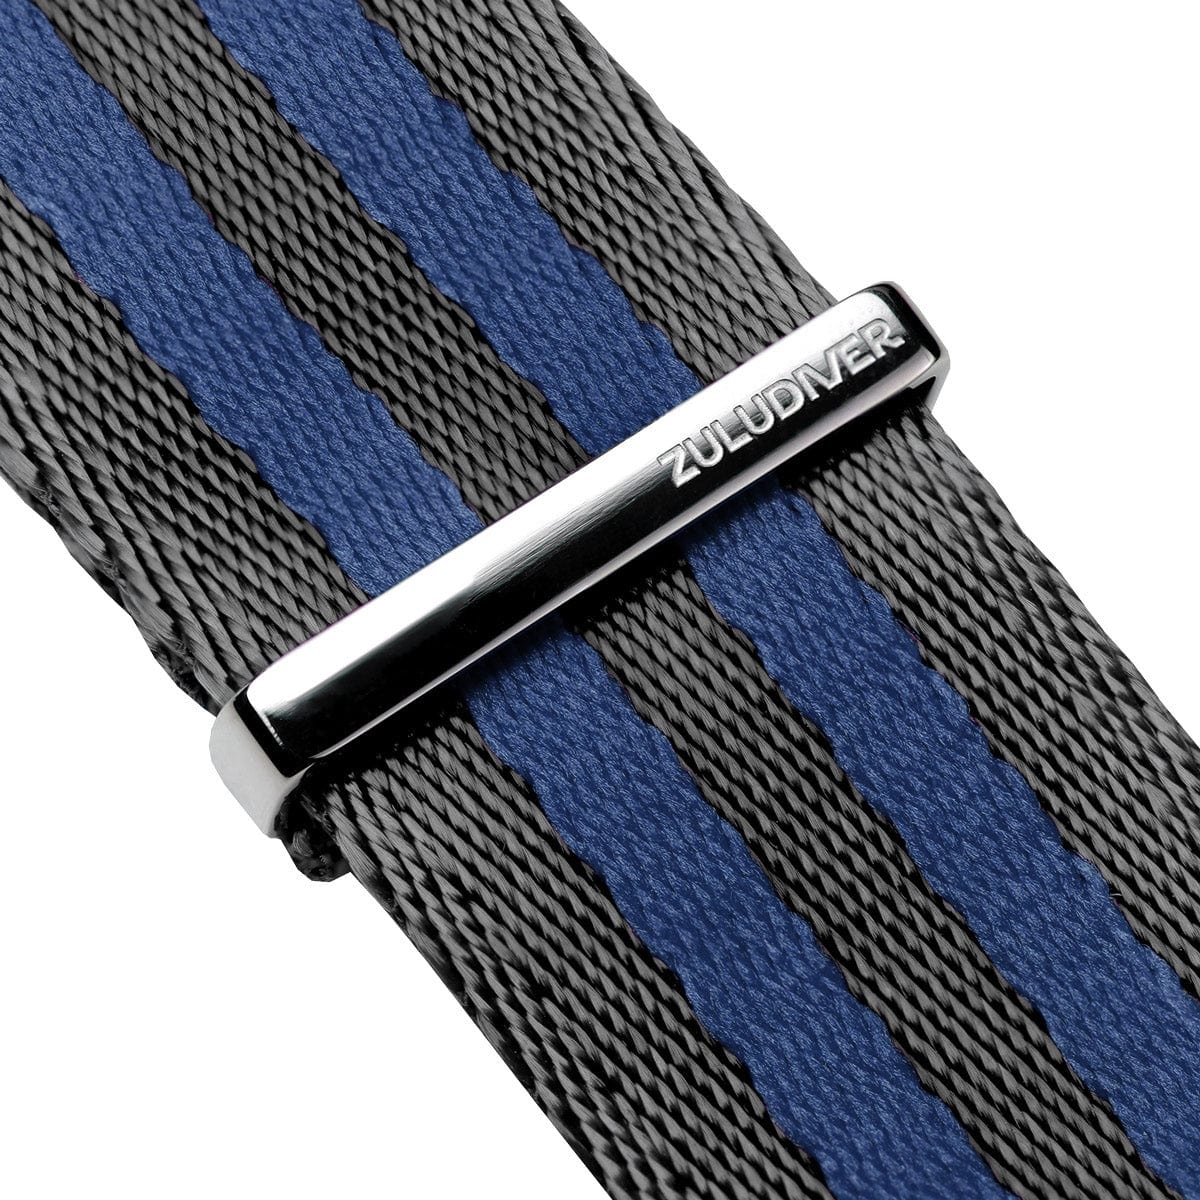 ZULUDIVER 1973 British Military Watch Strap: ARMOURED RECON - Navy Bond, Polished